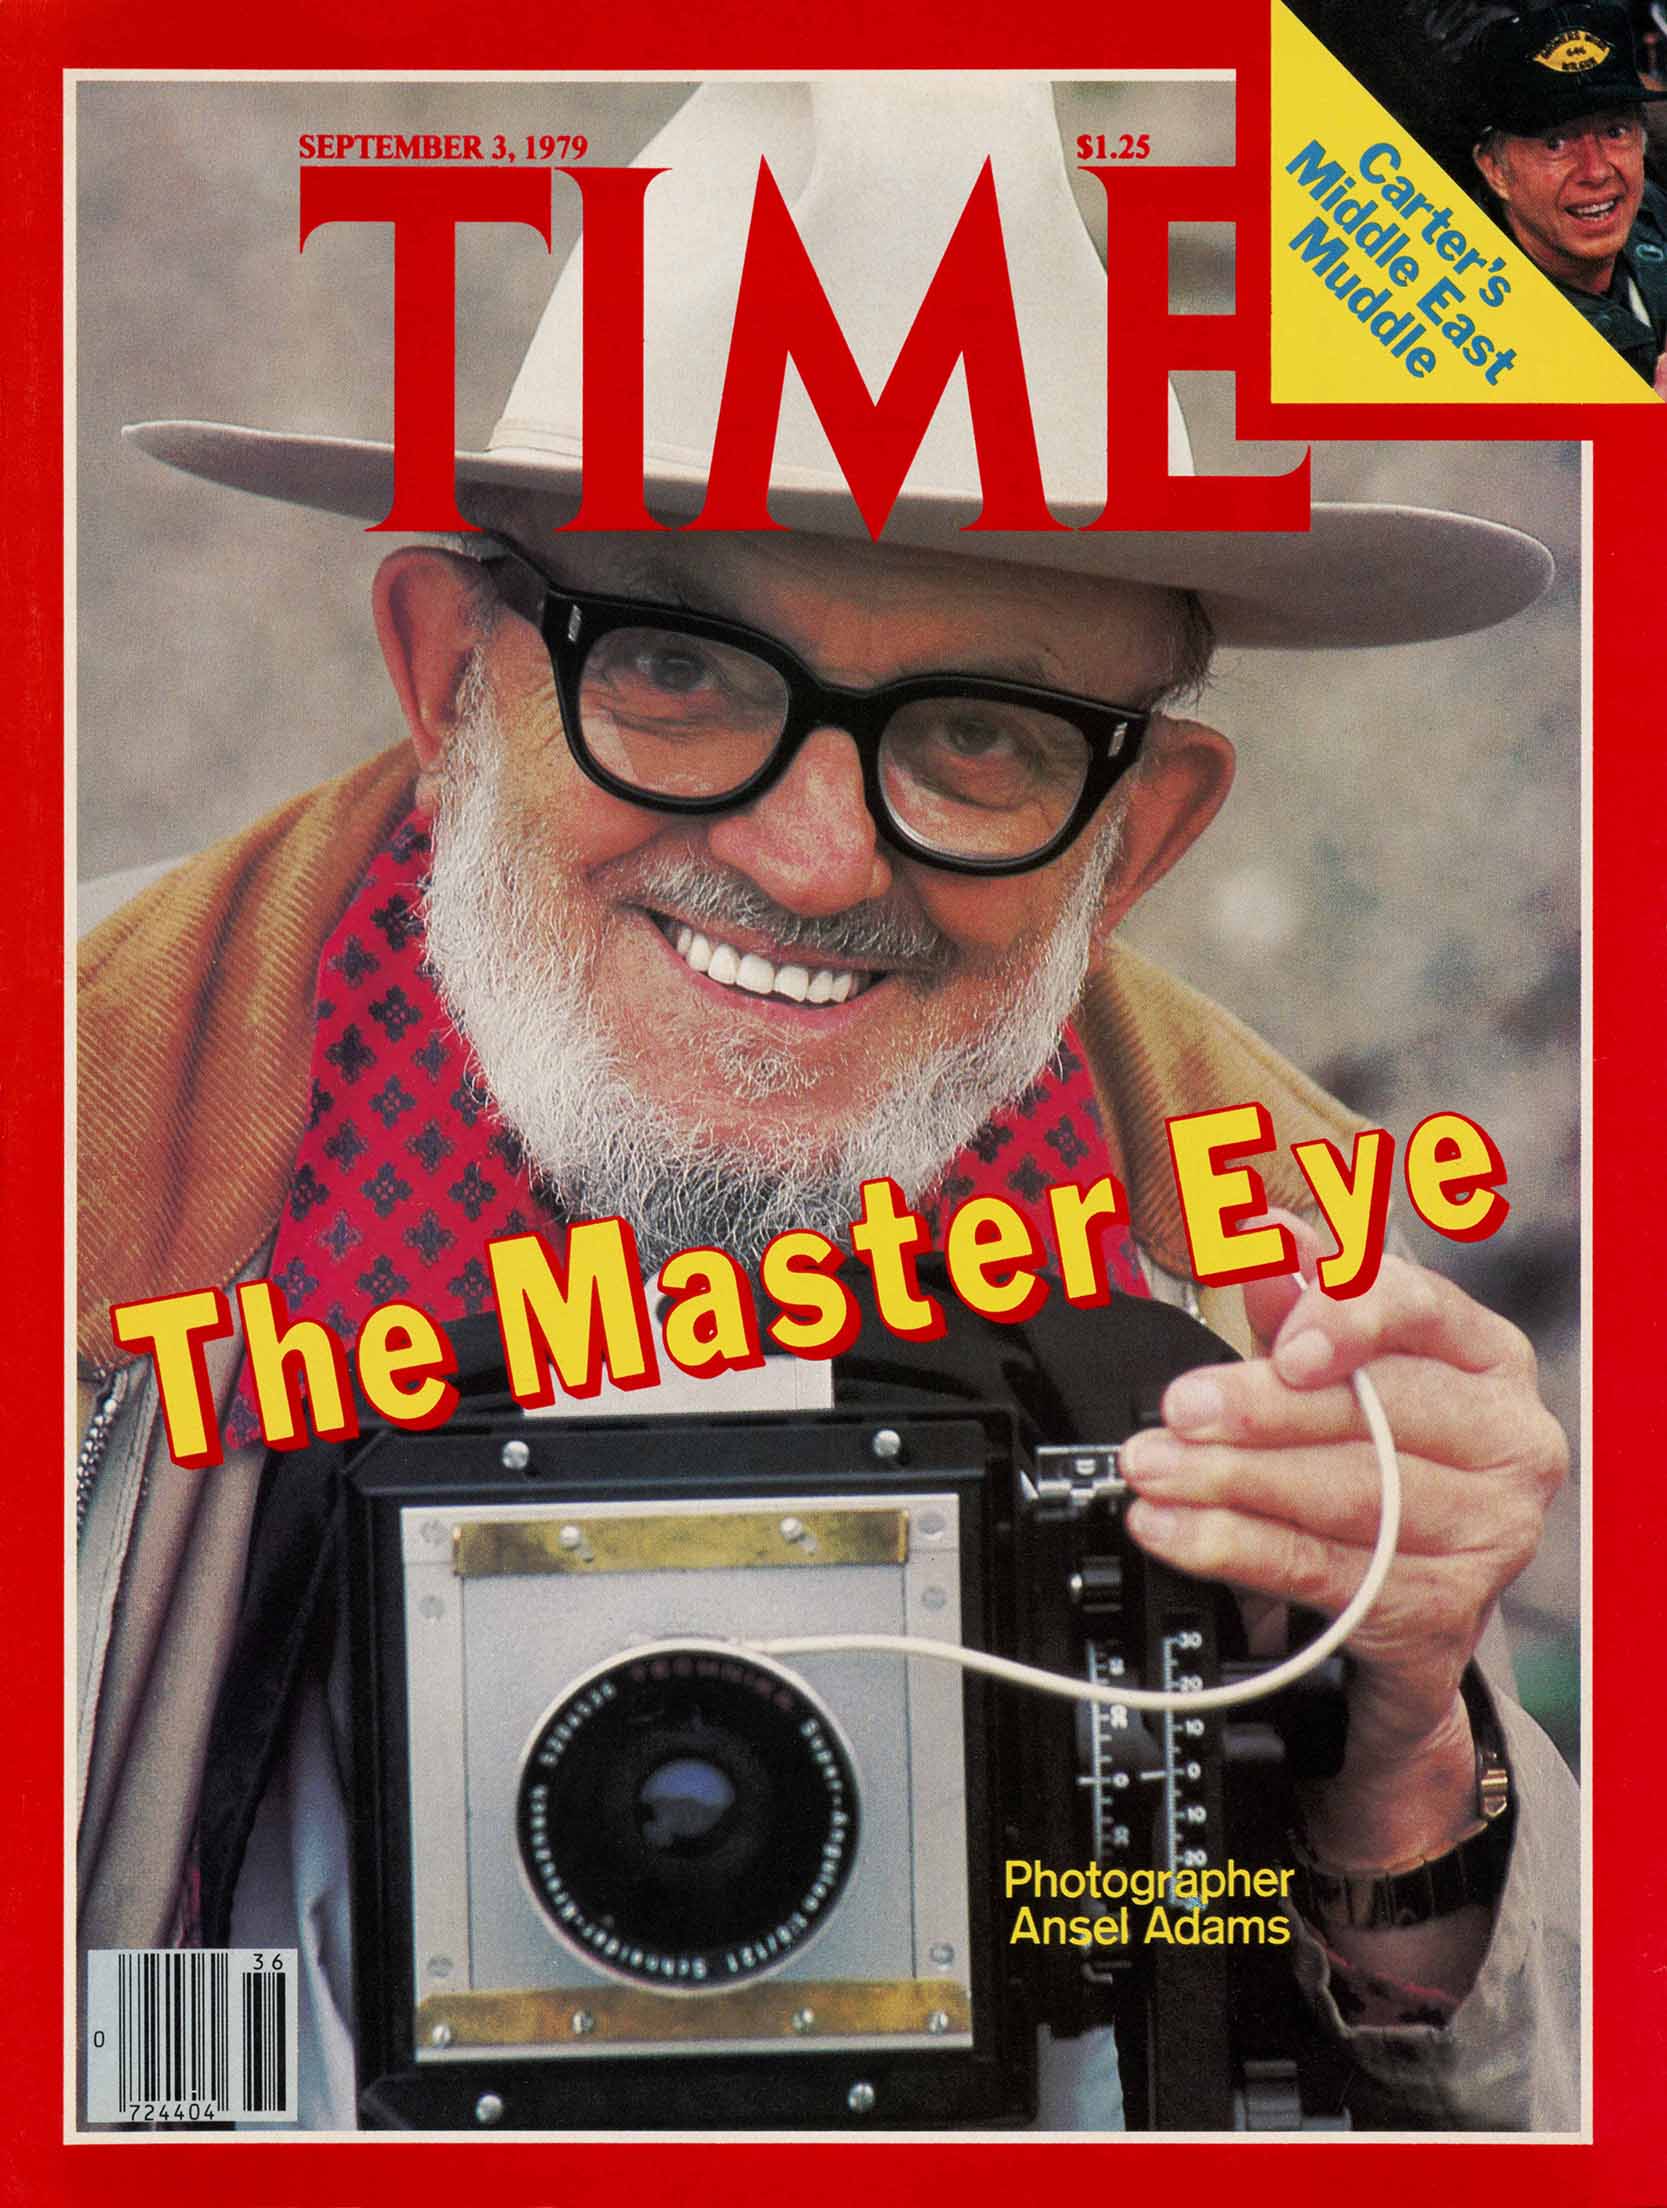 Ansel Adams on cover of TIME Magazine, September 3, 1979